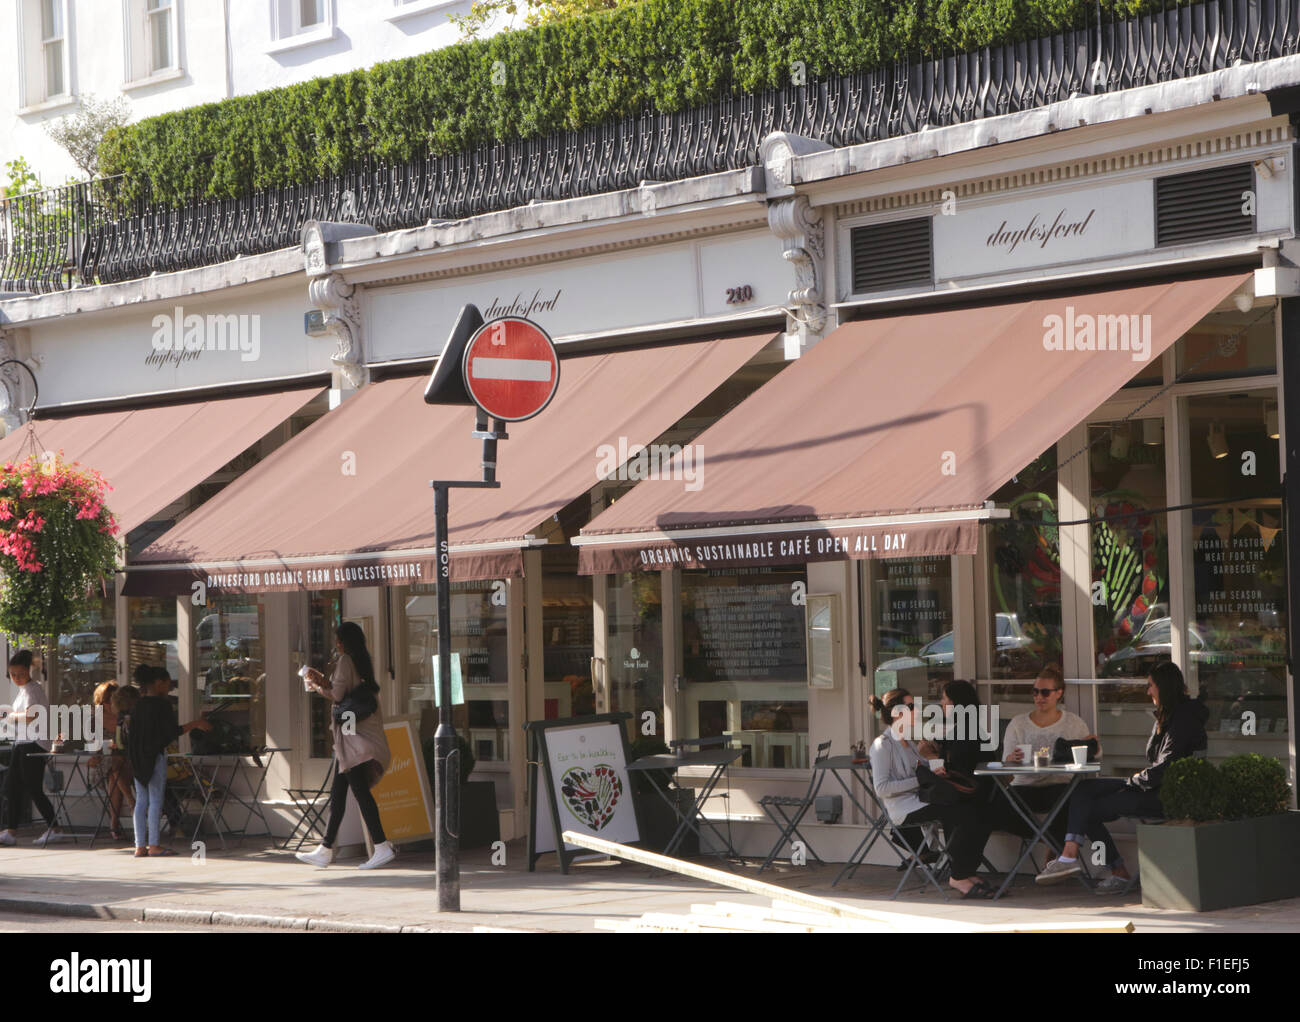 Daylesford farmshop and cafe Westbourne Grove Notting Hill London Stock Photo